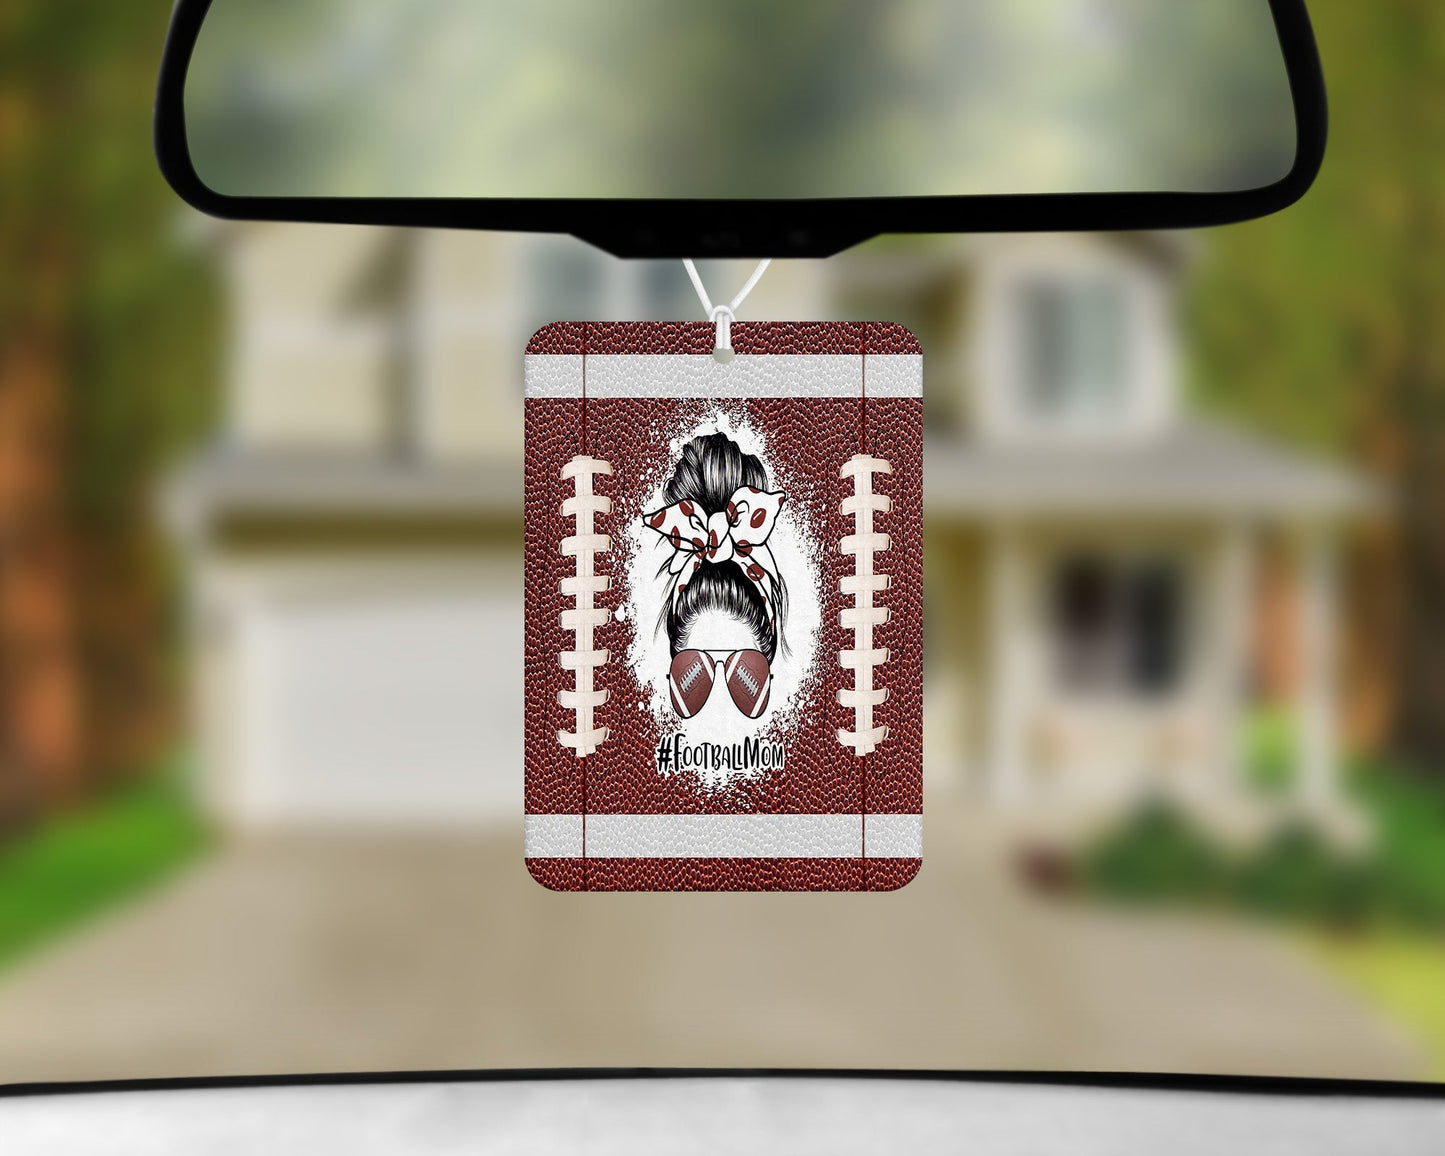 Football Mom|Freshie|Includes Scent Bottle - Vehicle Air Freshener